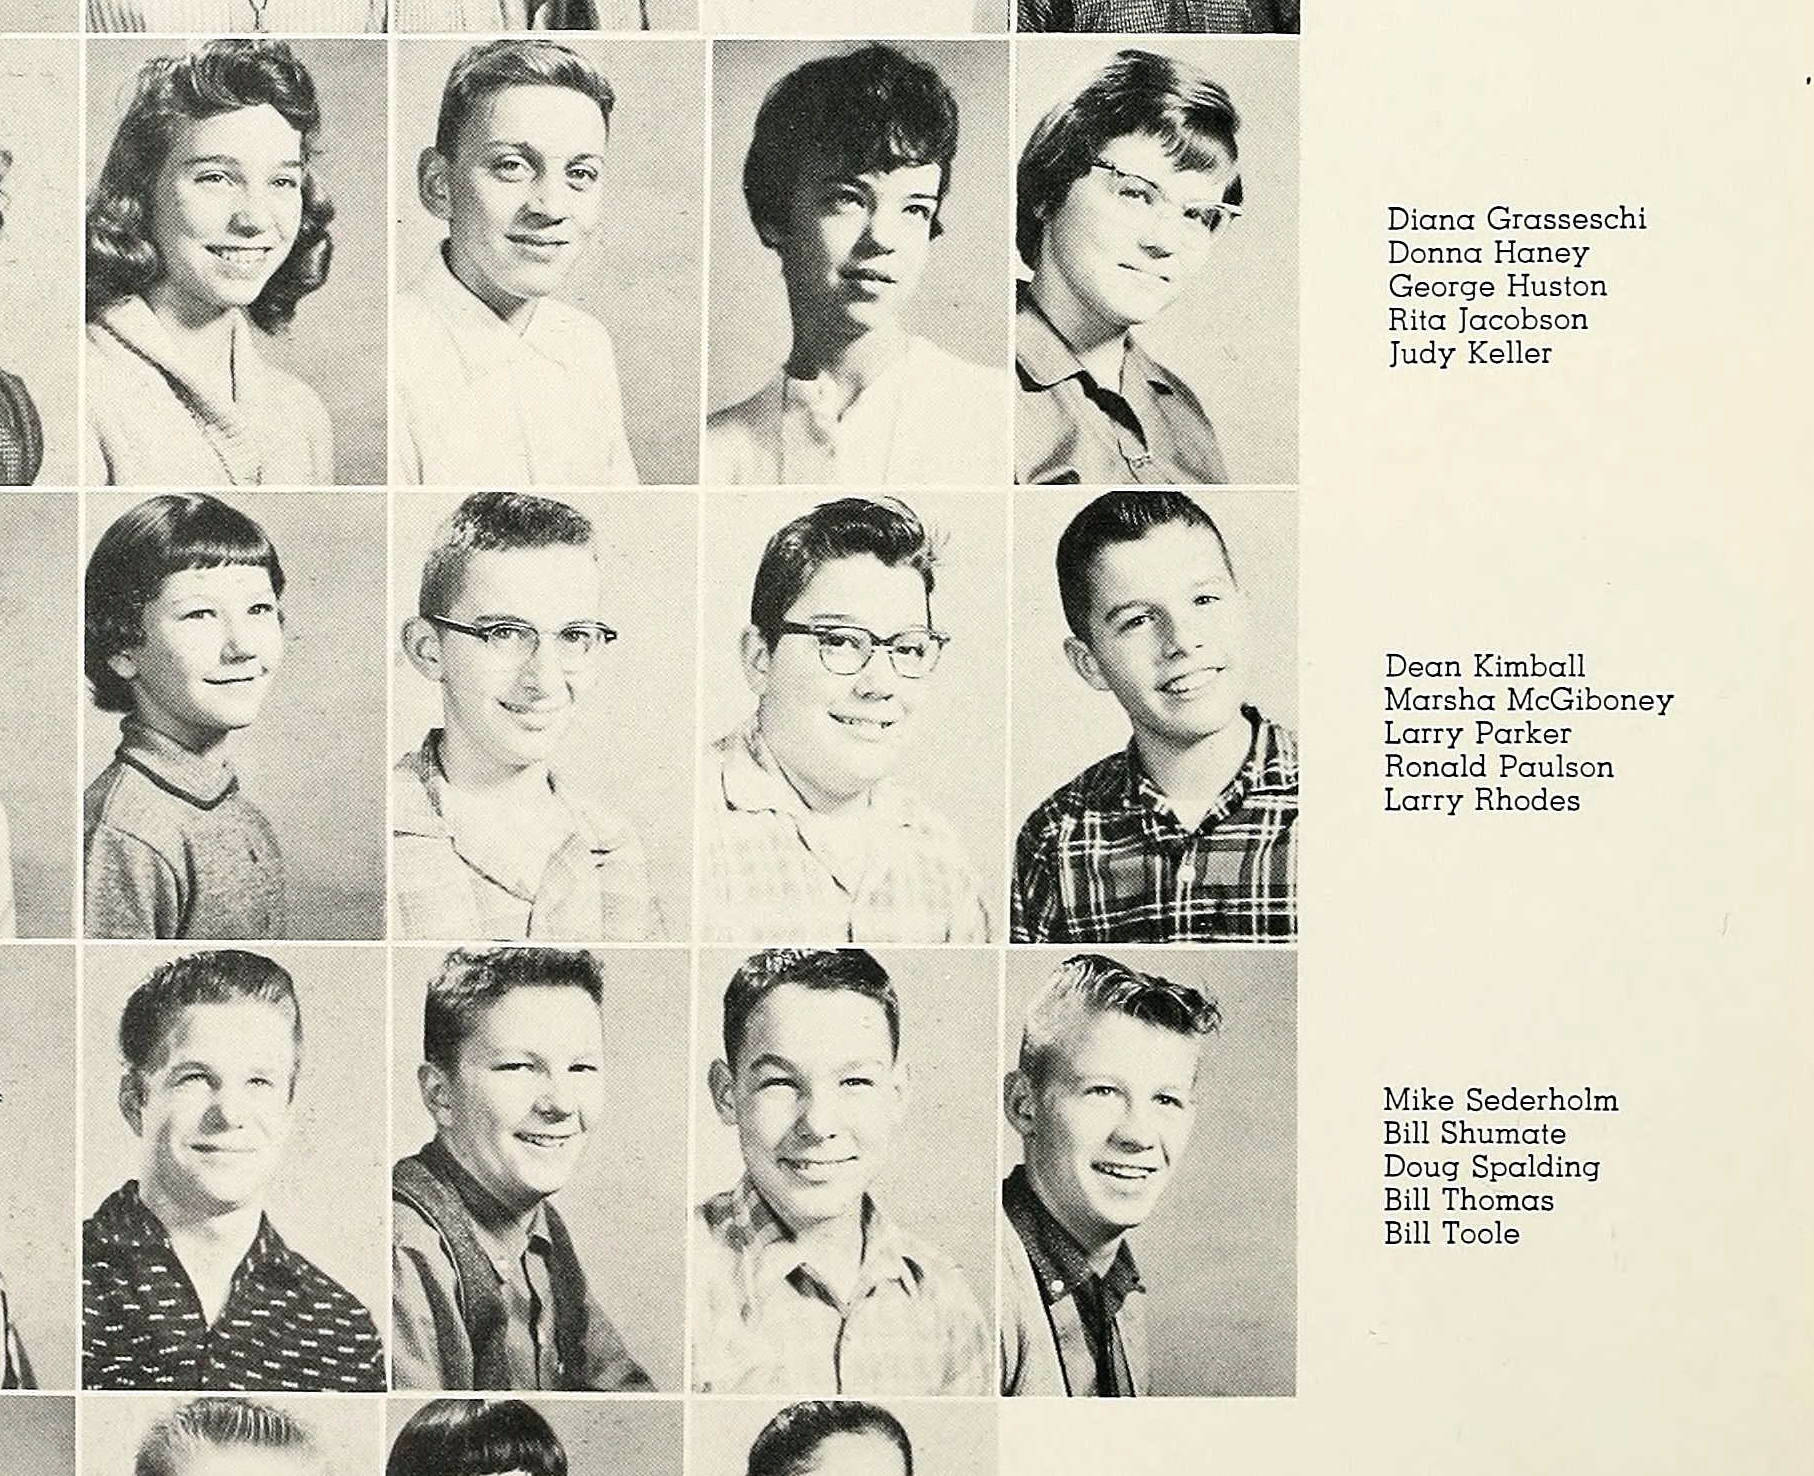 Second row, third from left: Ronald Lee Paulson in his 1959 junior high school yearbook.